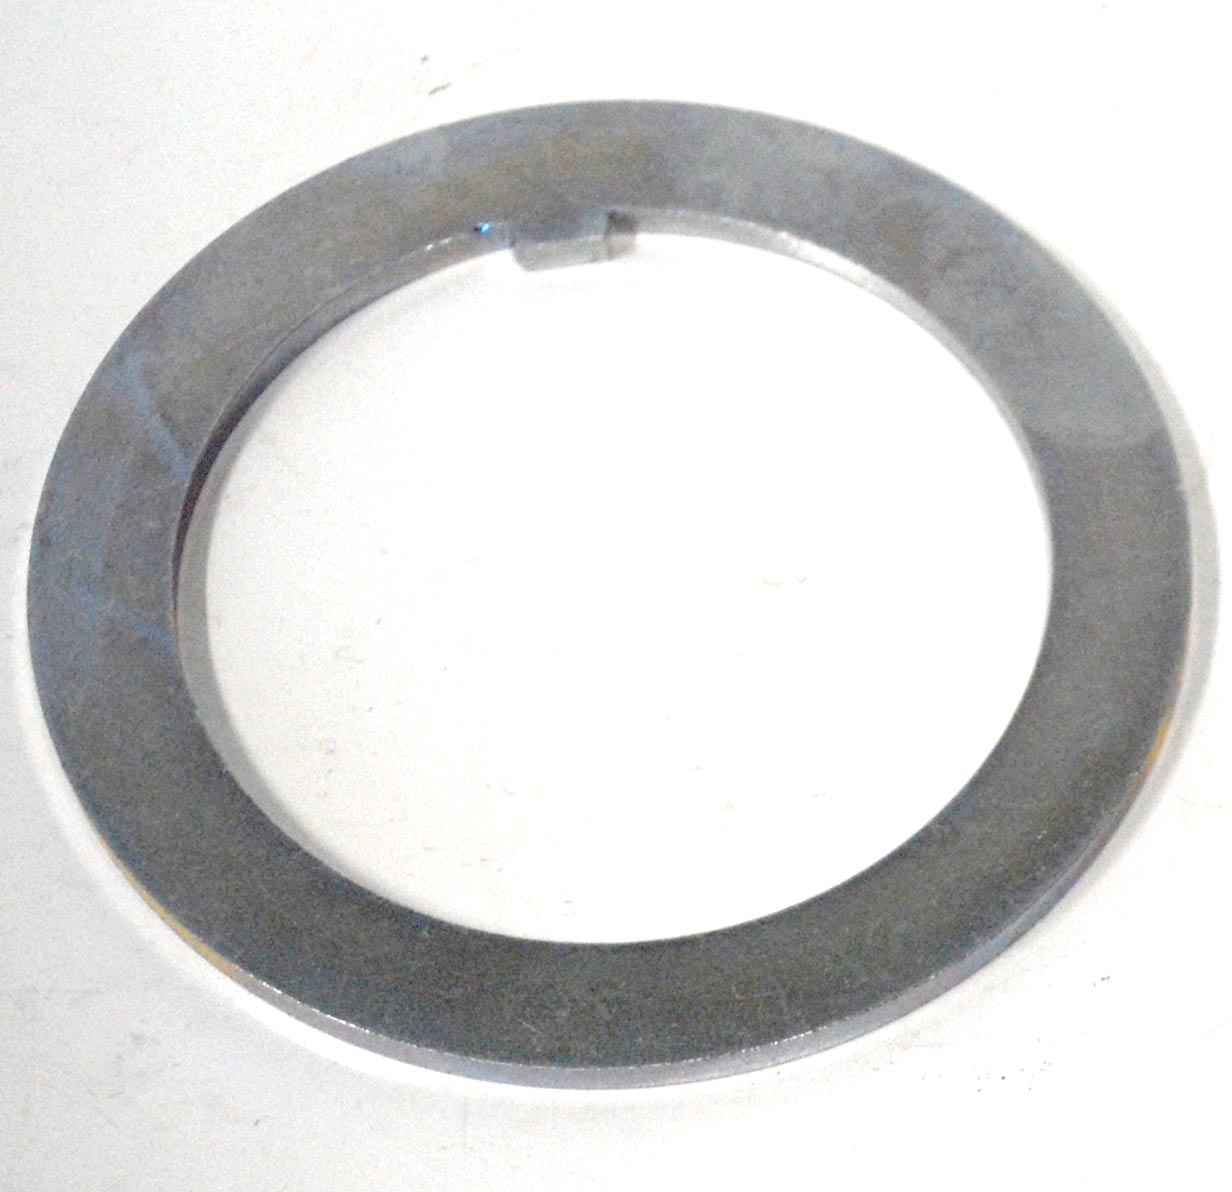 Part # 4276 GN Snout Lock Washer